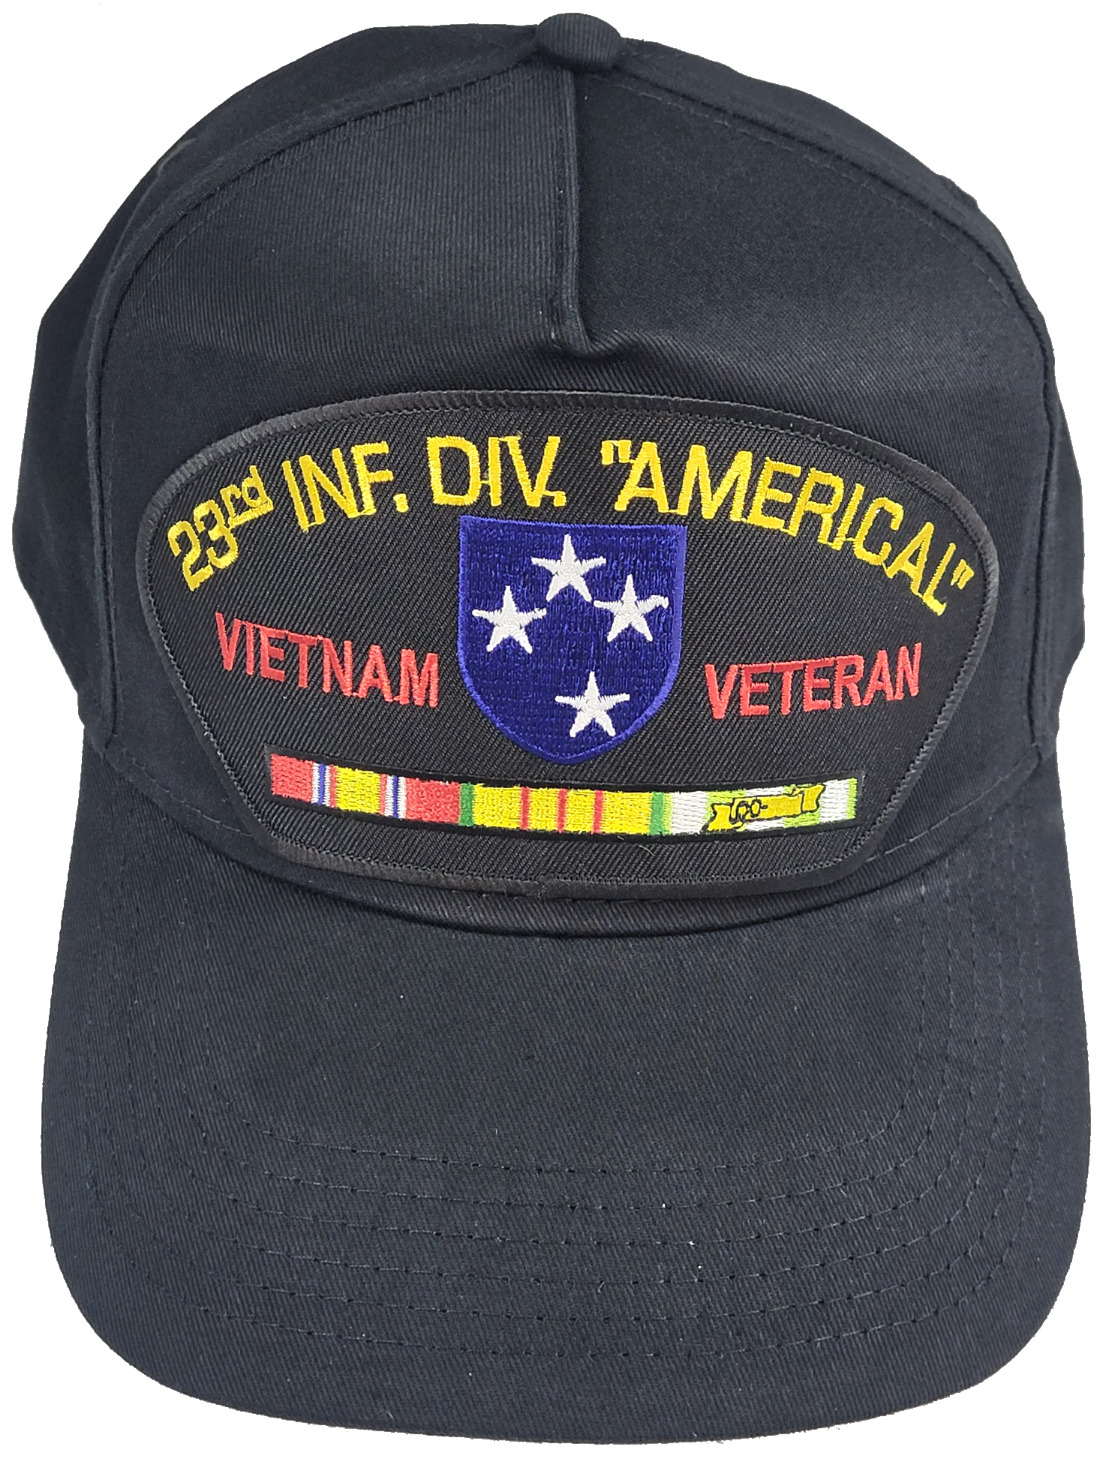 US ARMY 23RD INFANTRY DIVISION AMERICAL VIETNAM VETERAN W/ SERVICE RIBBONS HAT